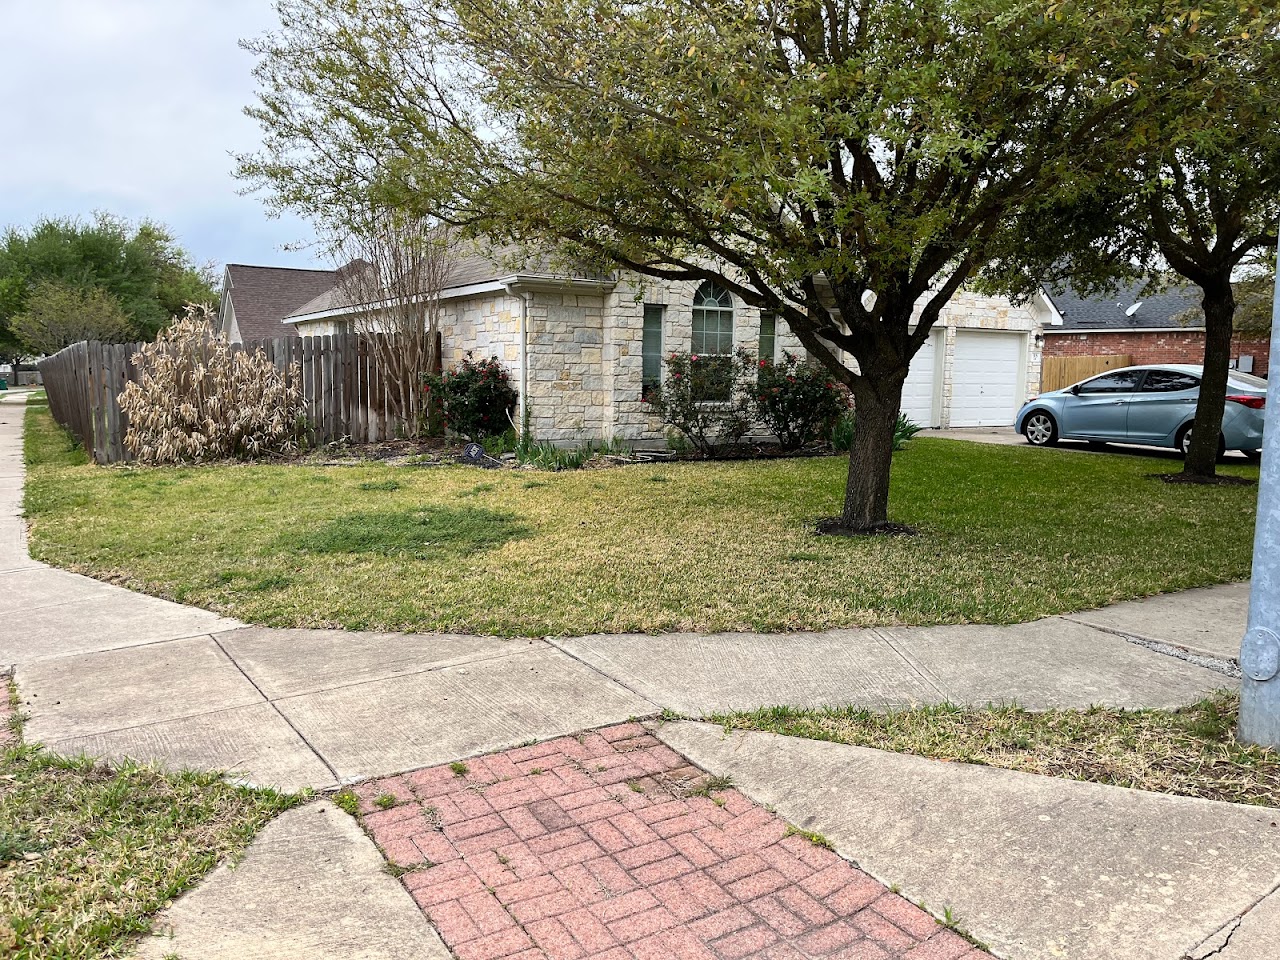 Photo of CAMBRIDGE VILLAS. Affordable housing located at 15711 DESSAU RD PFLUGERVILLE, TX 78660